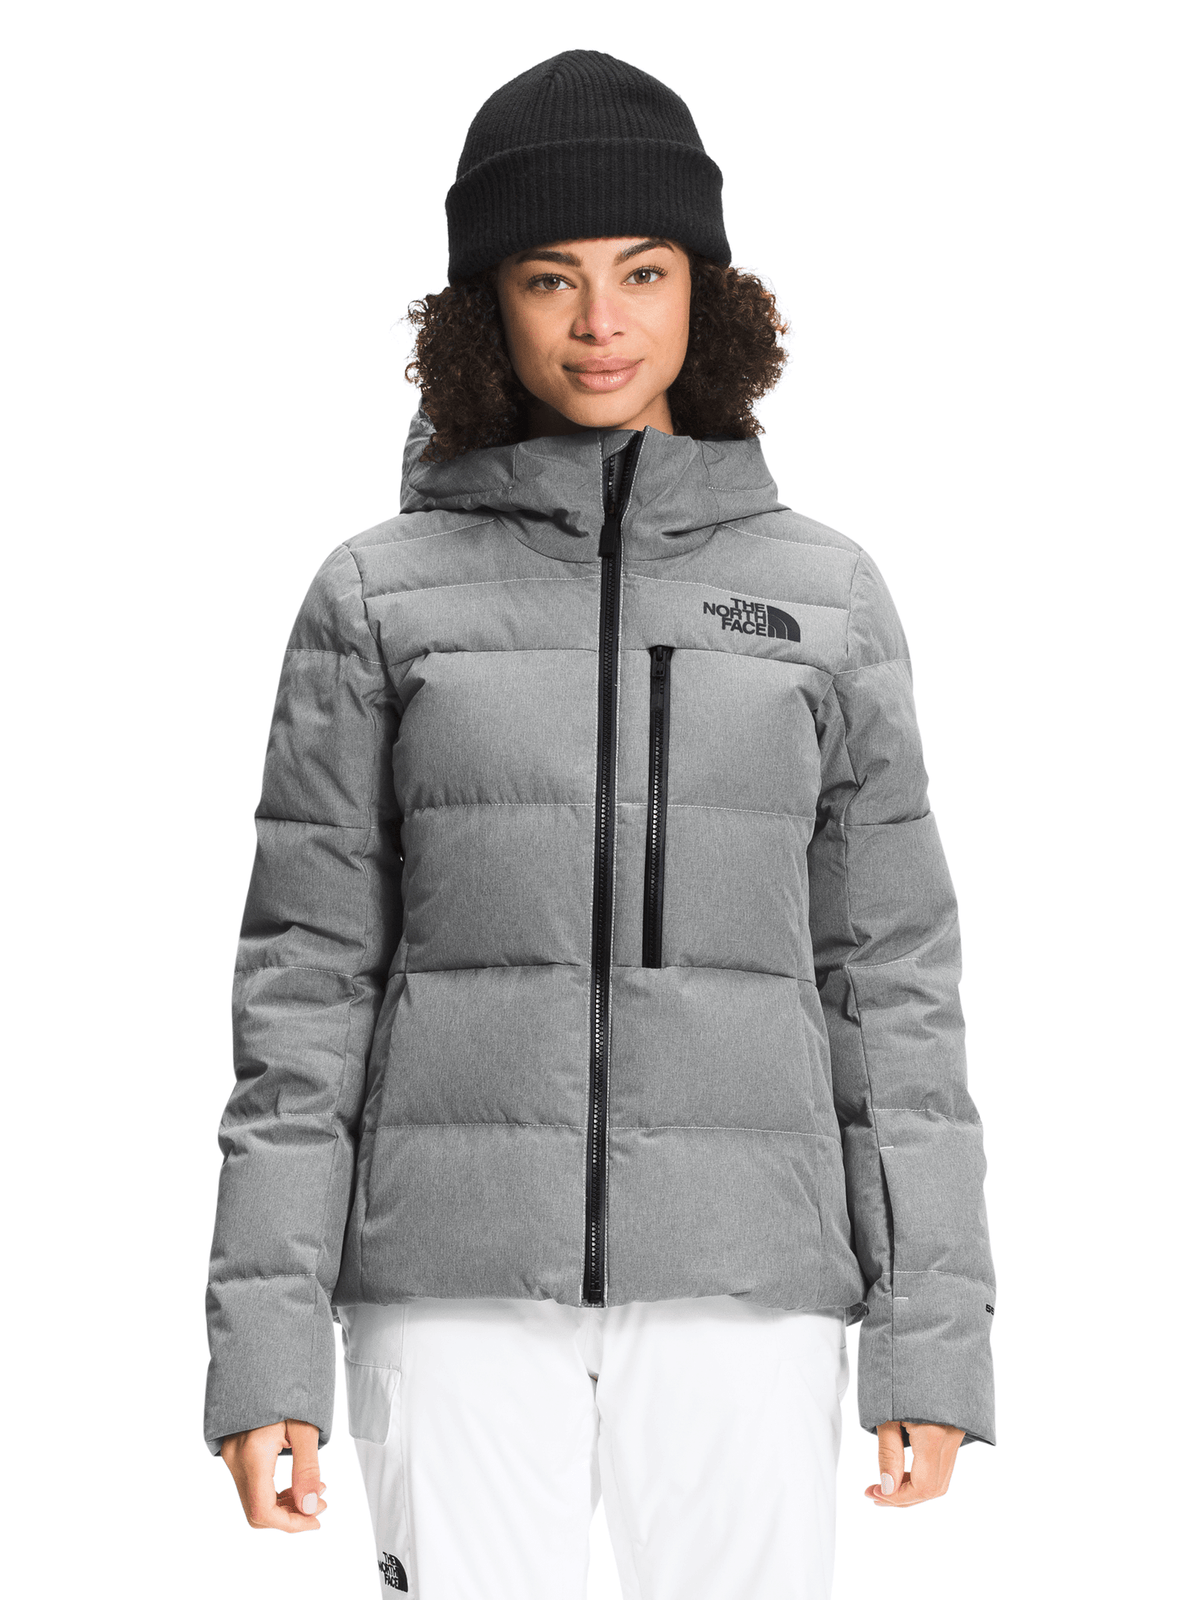 TNF Med GY Heather-swatch